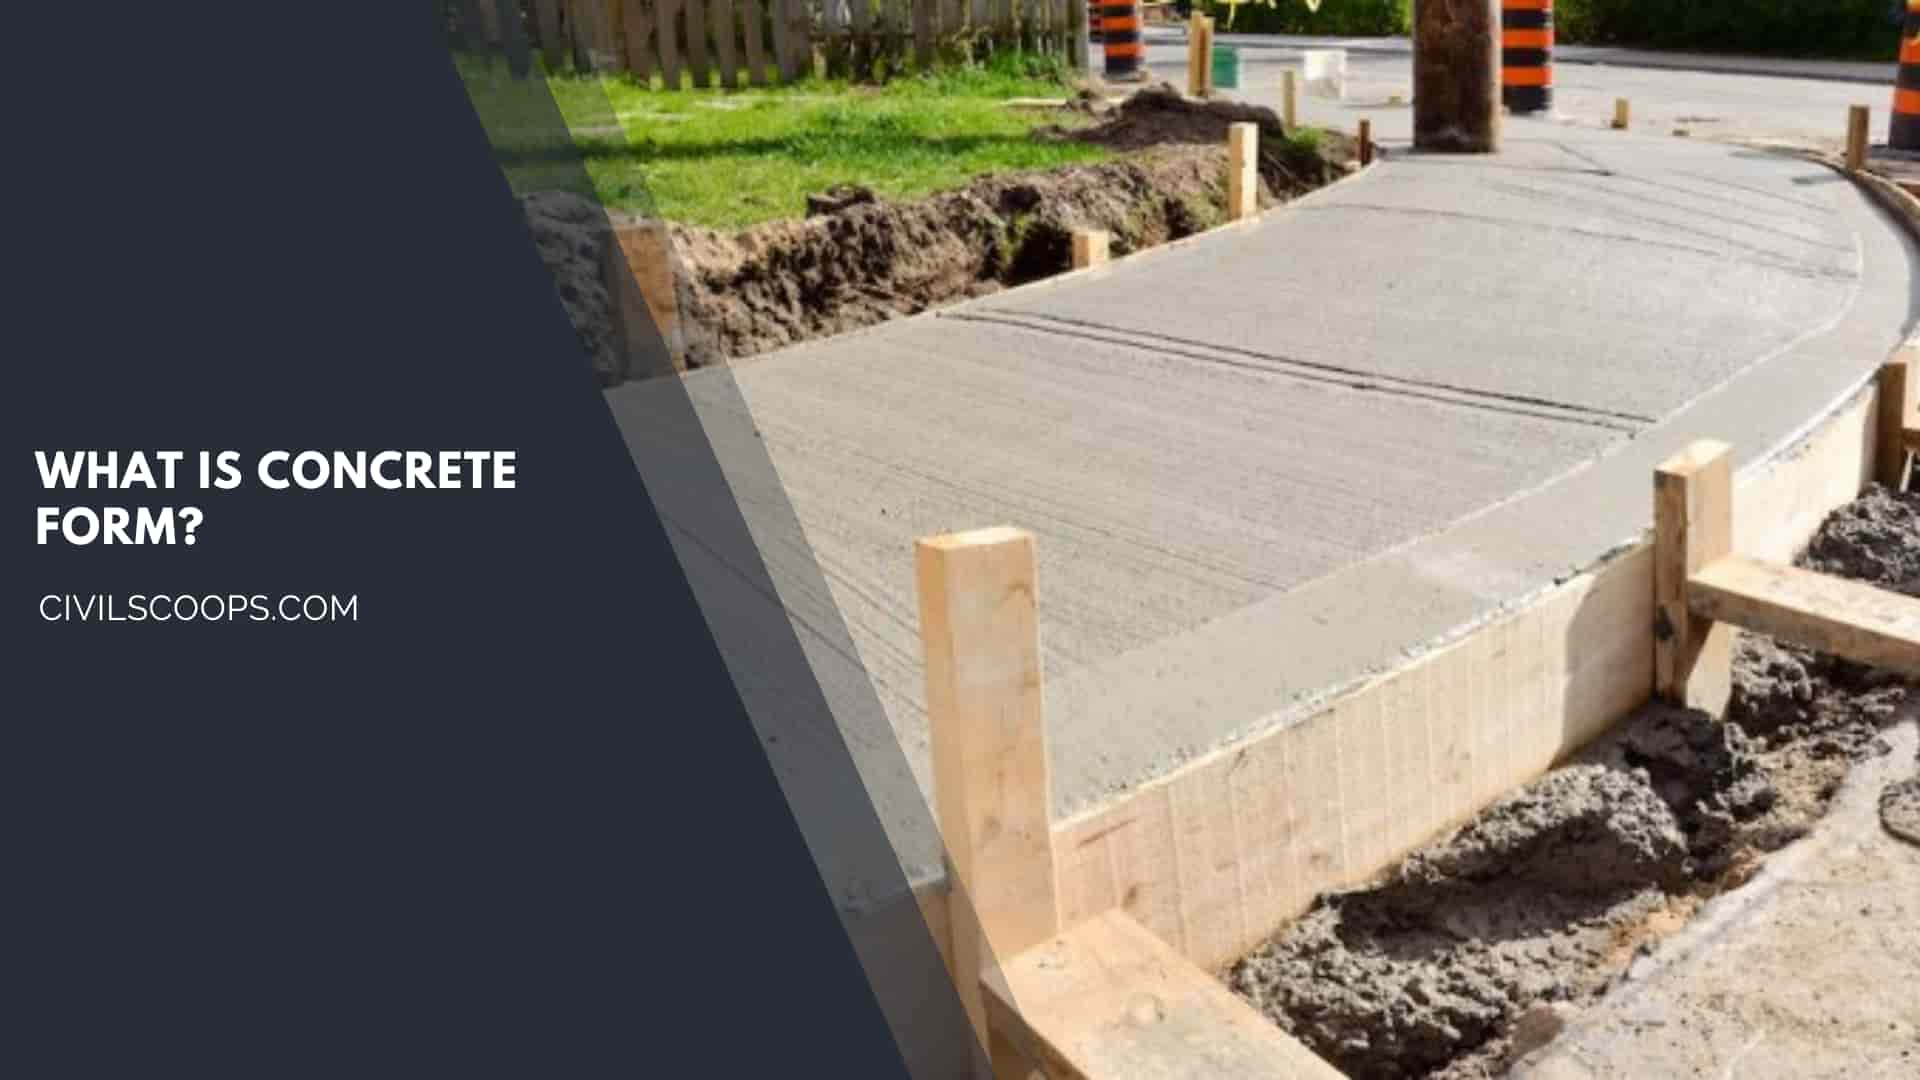 What Is Concrete Form?